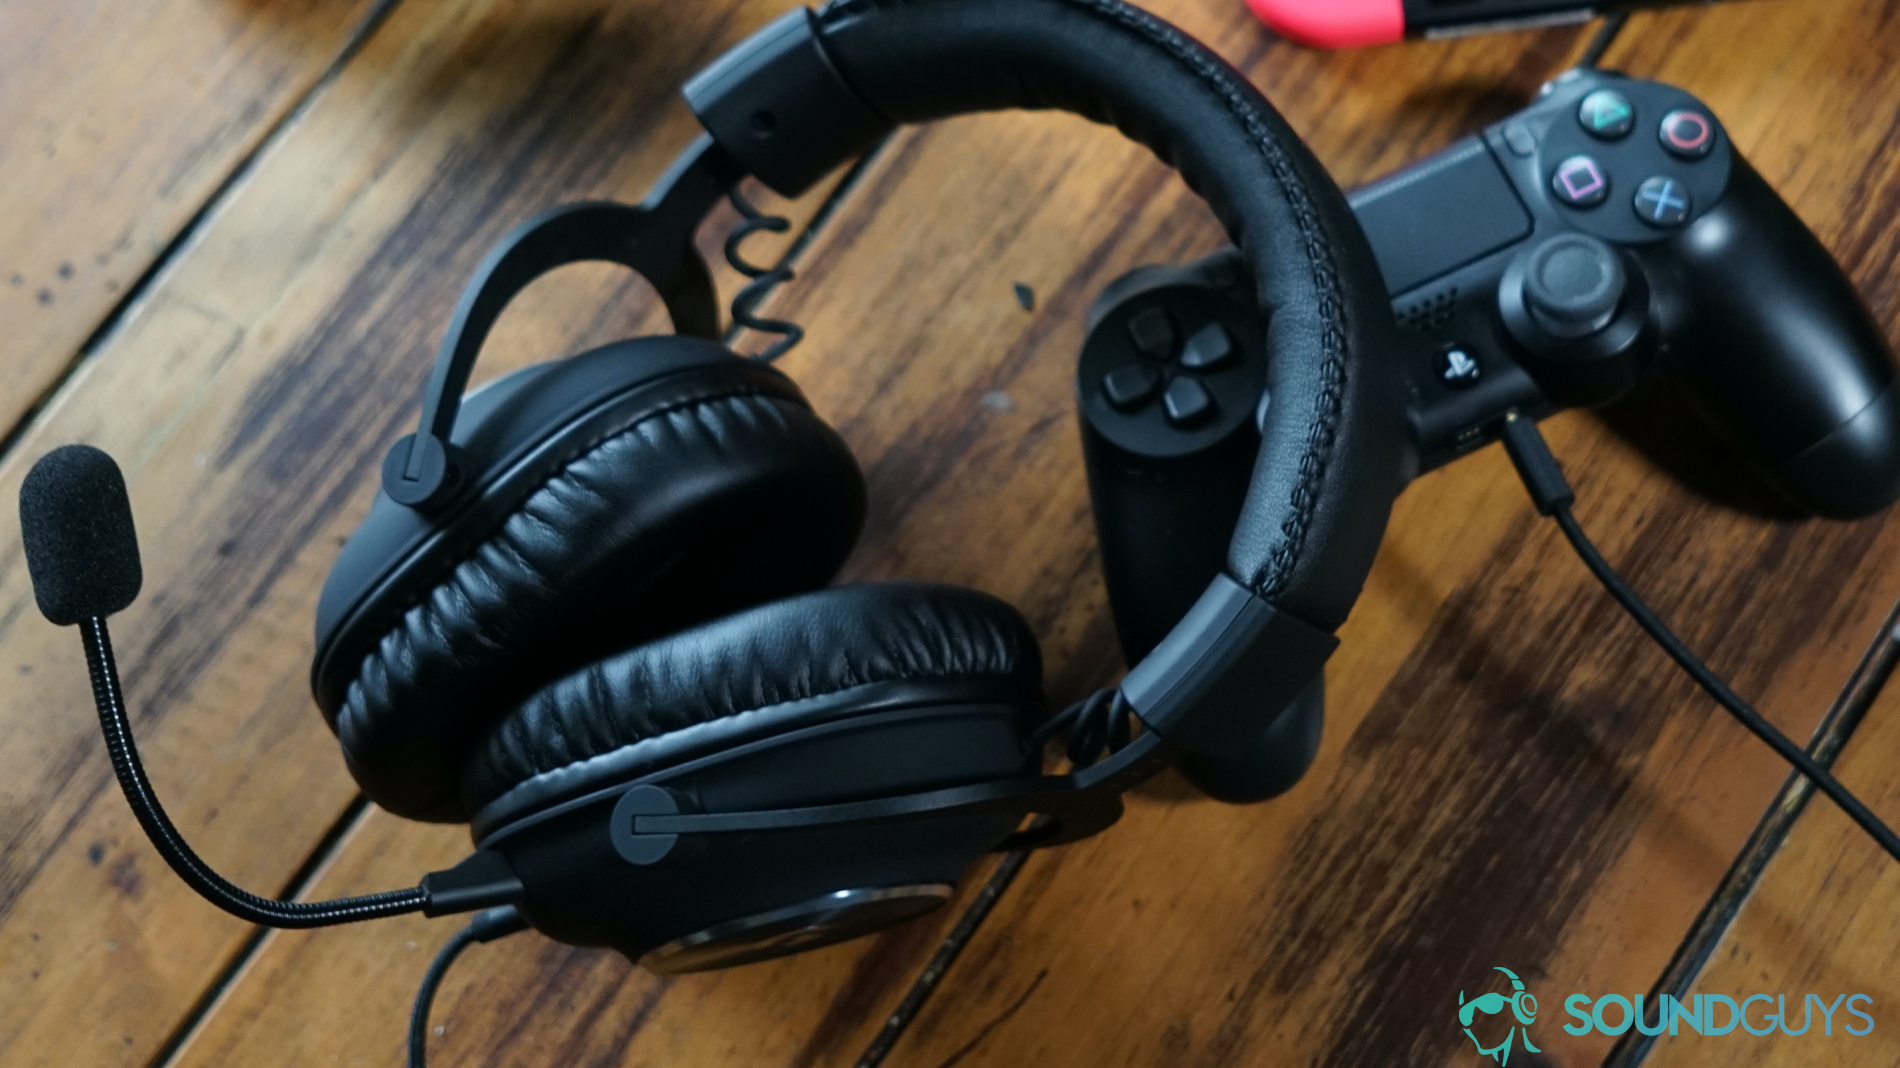 The Logitech G Pro X gaming headset leans on a PlayStation 4 Dualshock controller with a Nintendo Switch behind it.